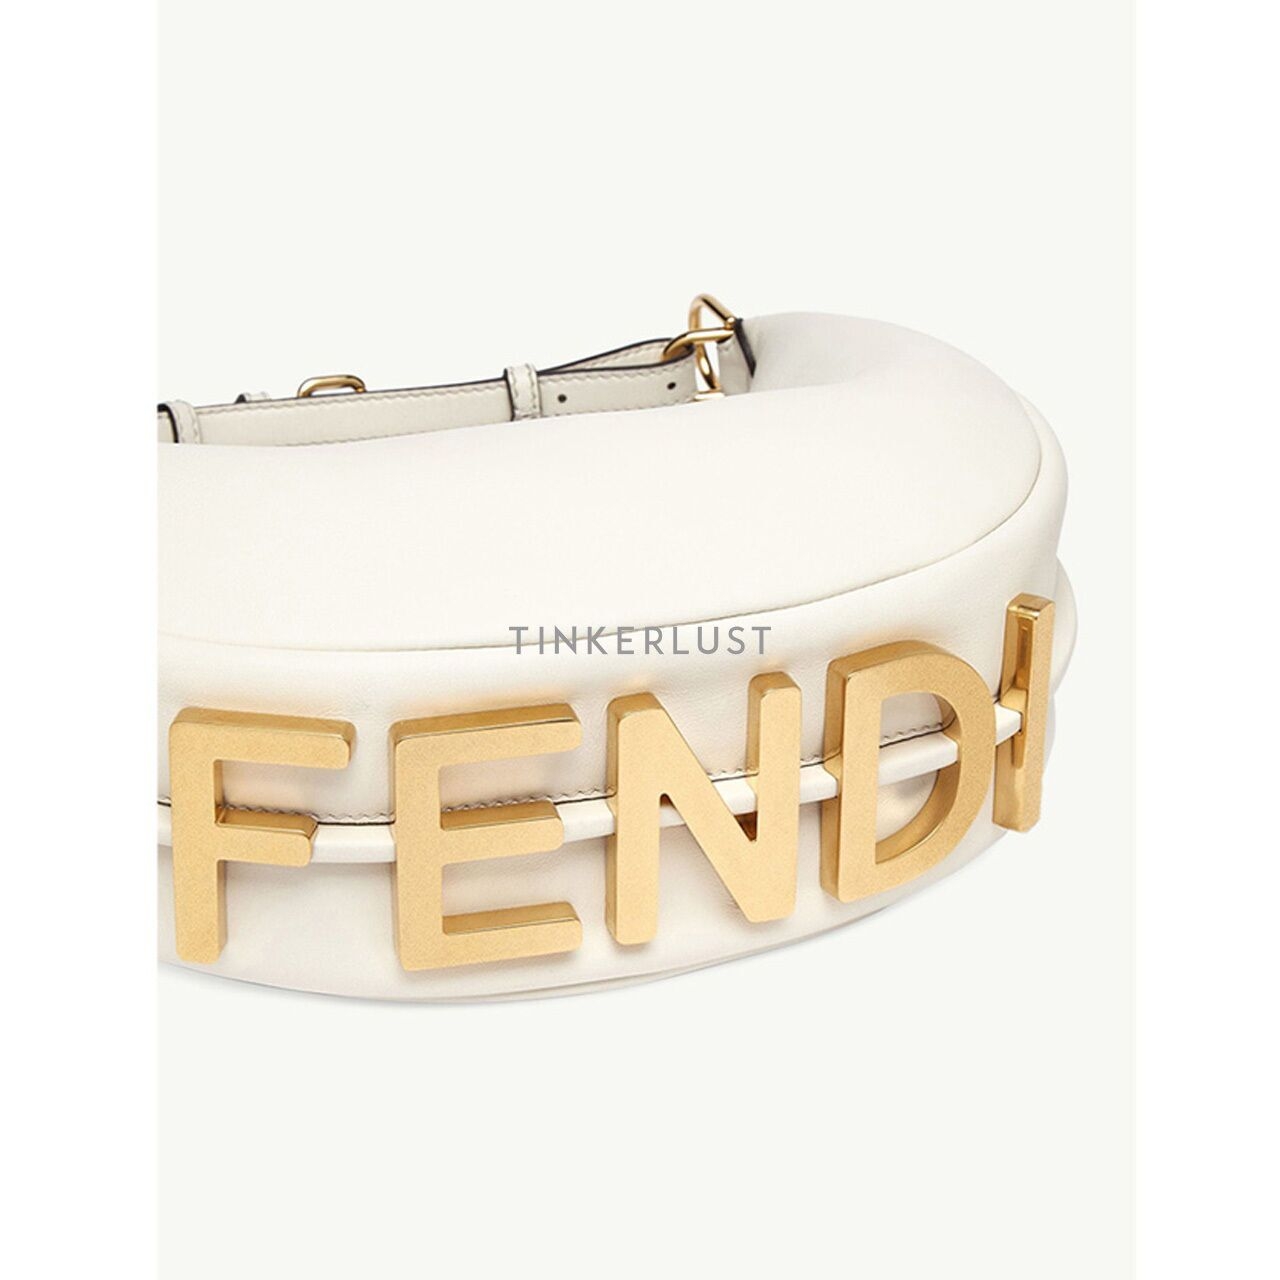 Fendi Small Fendigraphy in White Calf Leather Shoulder Bag